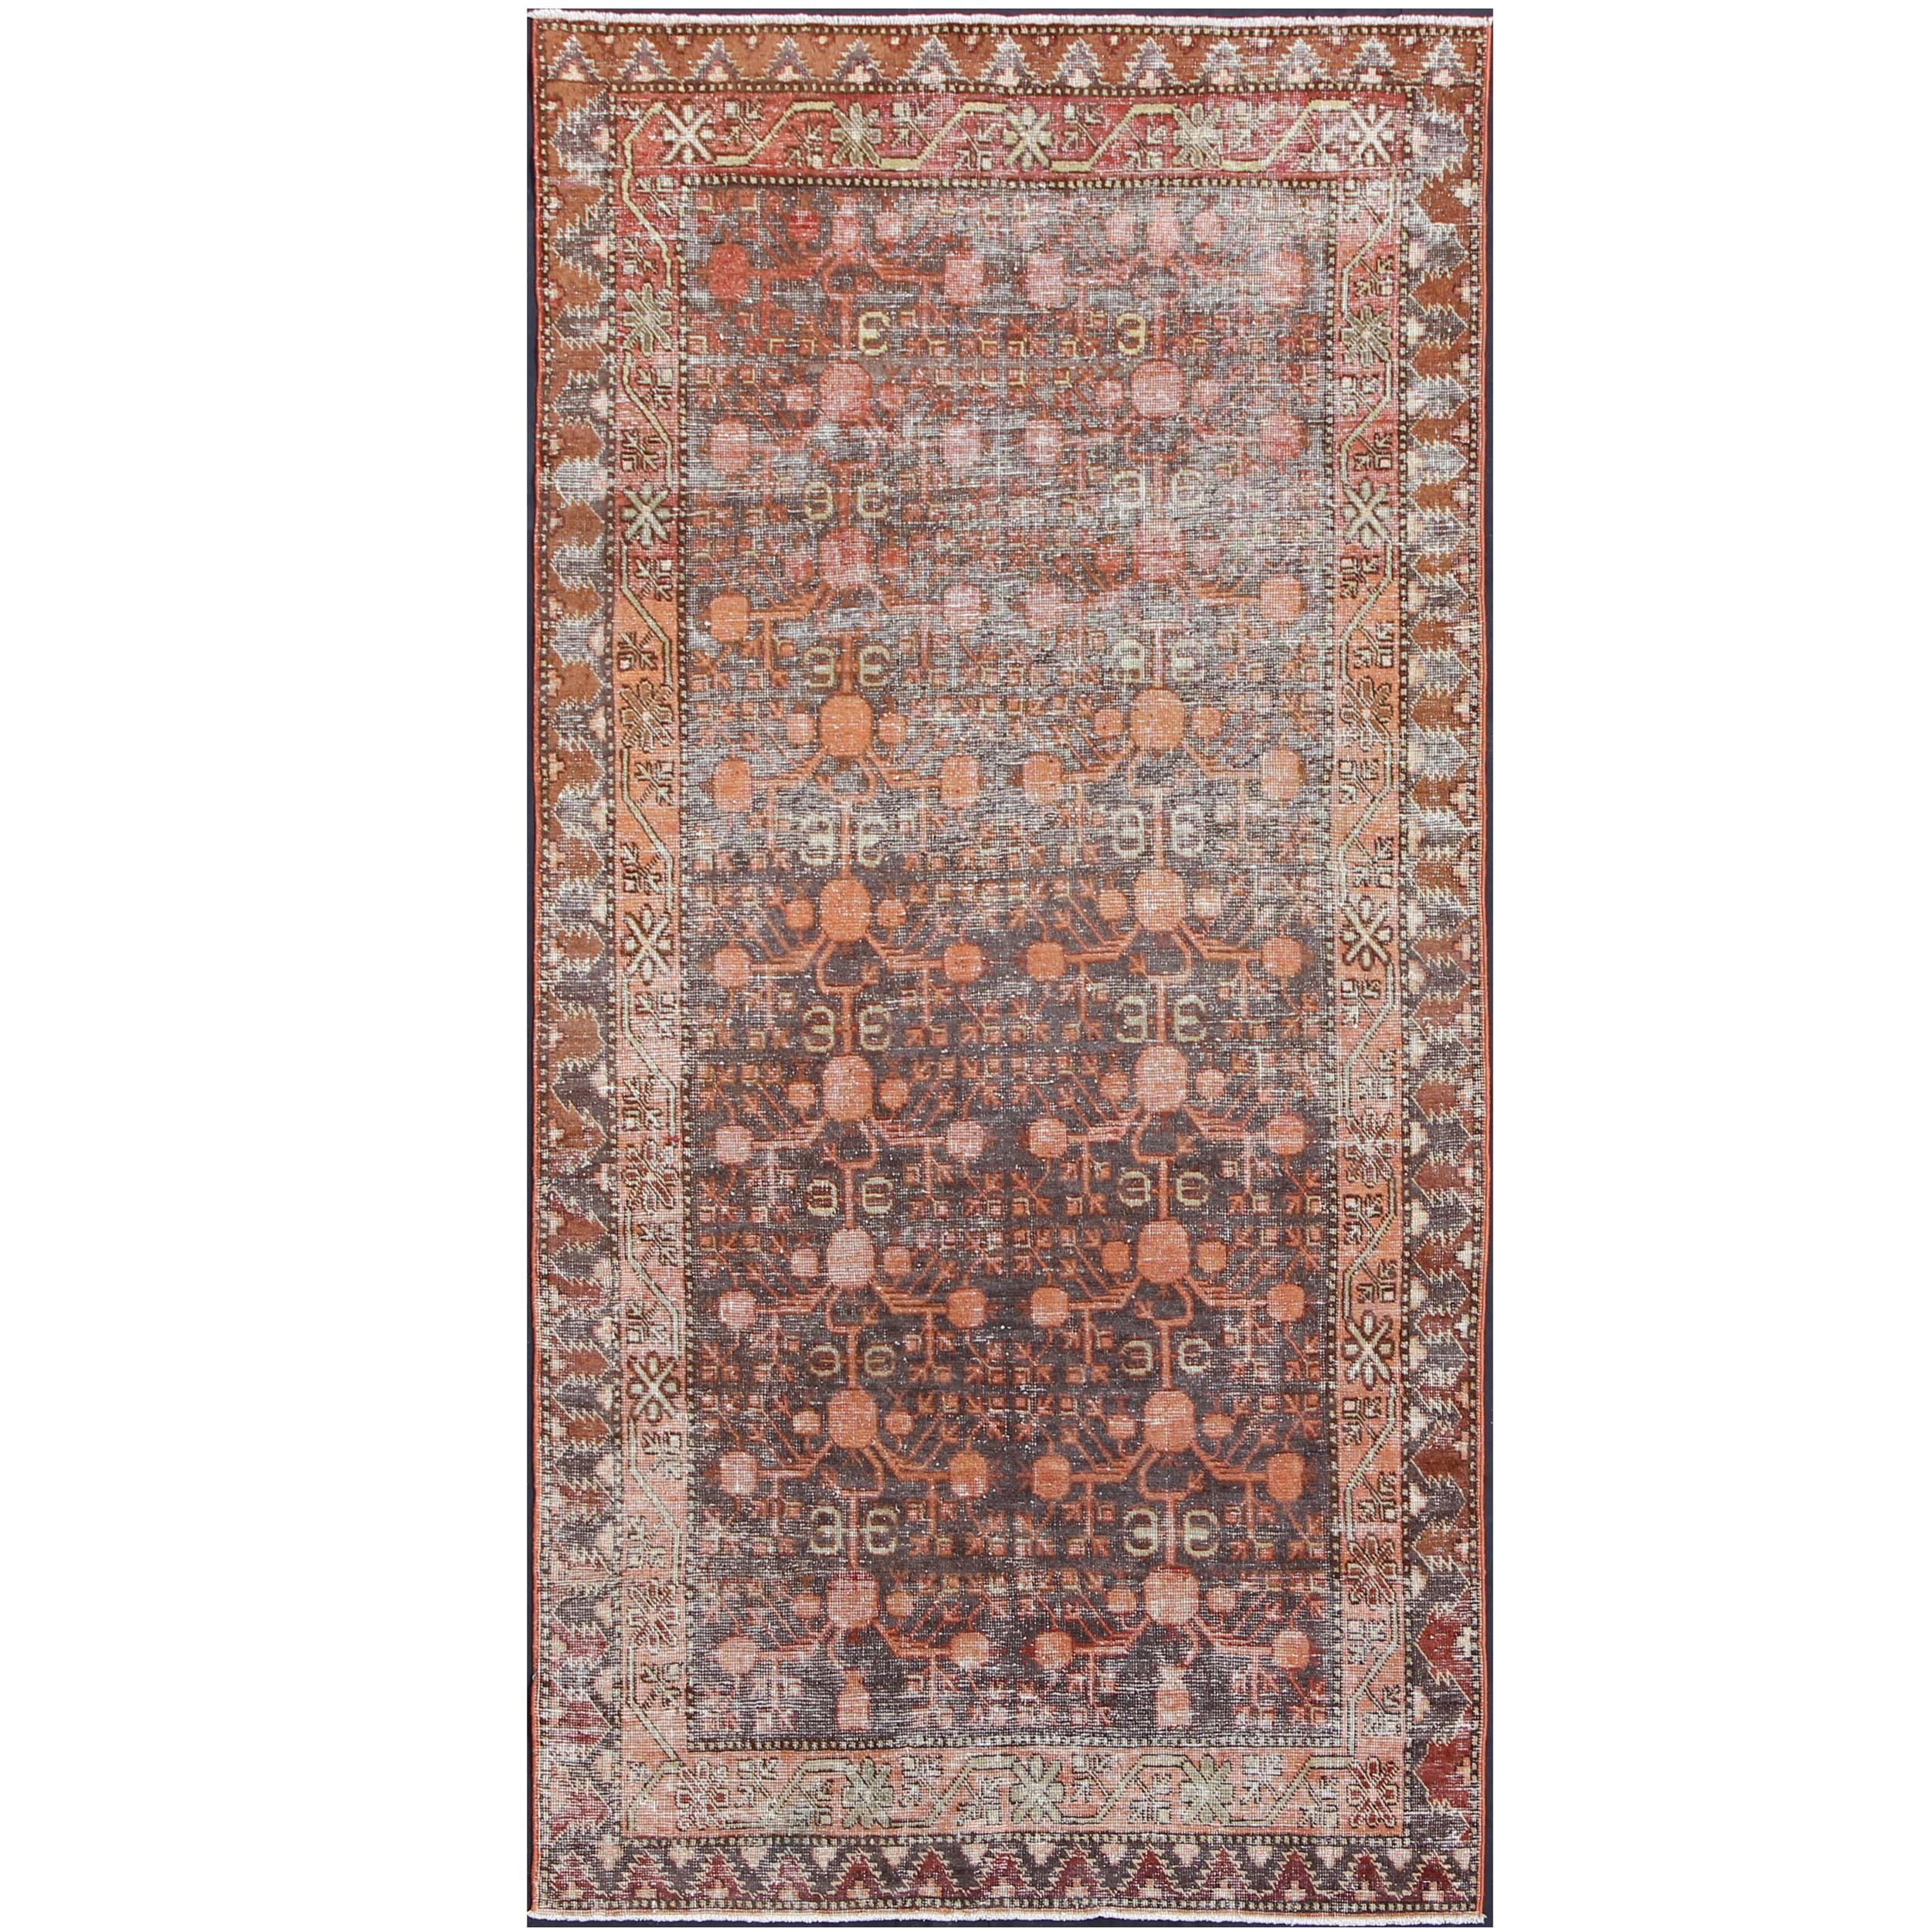 Antique Khotan Carpet in Charcoal, Burnt Red, Salmon and Taupe